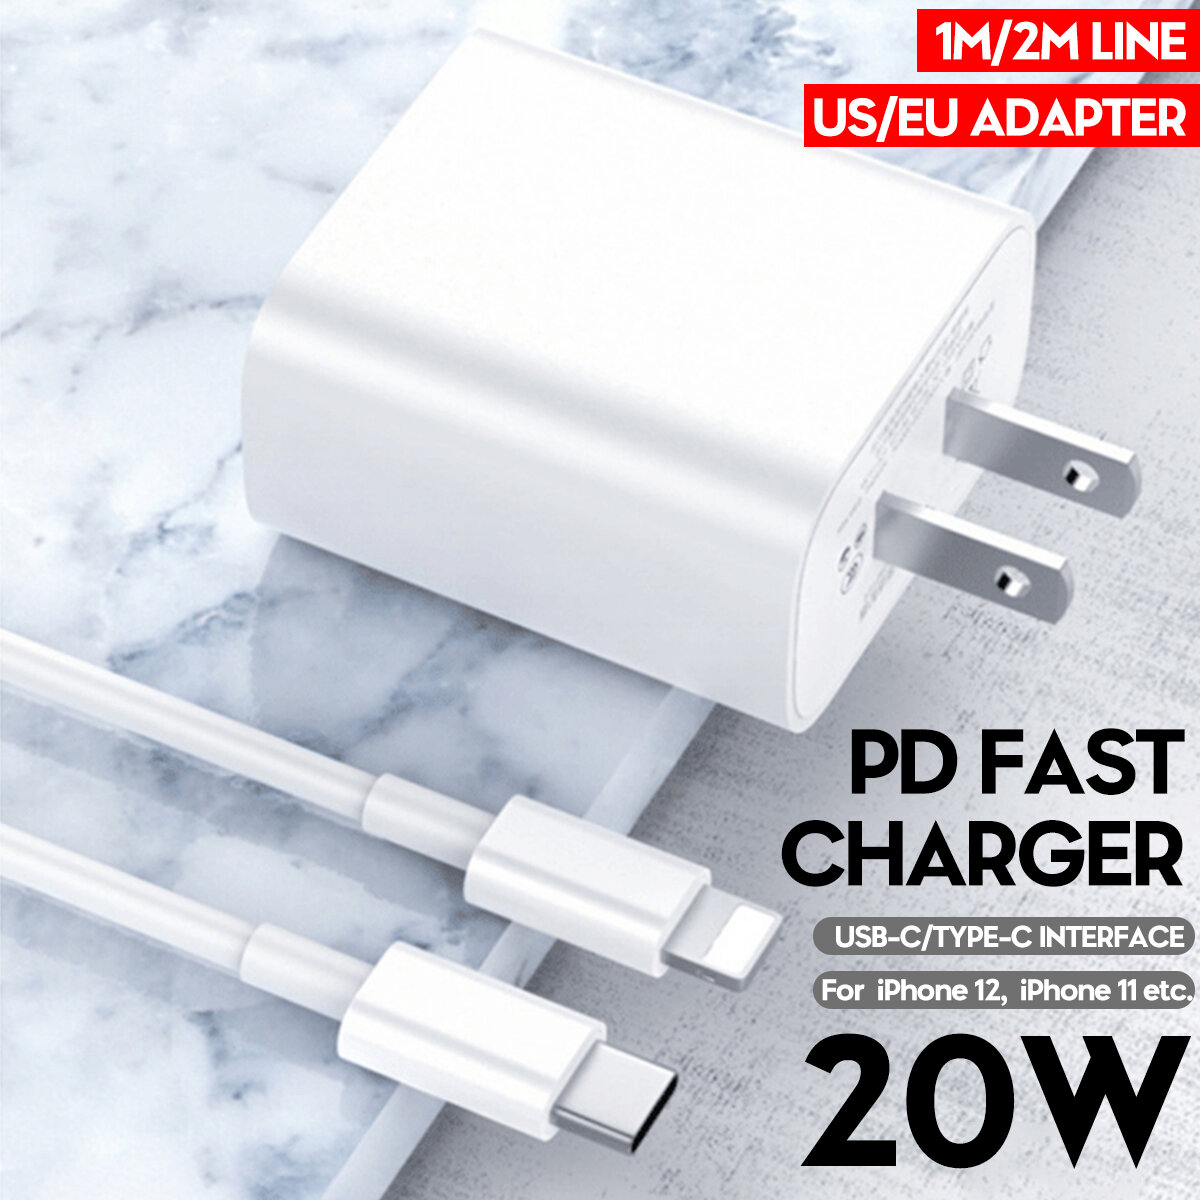 

Bakeey 20W USB C Charger Travel Charger Adapter USB-C PD for Lightning Data Cable Fast Charging iPhone 12 Pro Max Mini